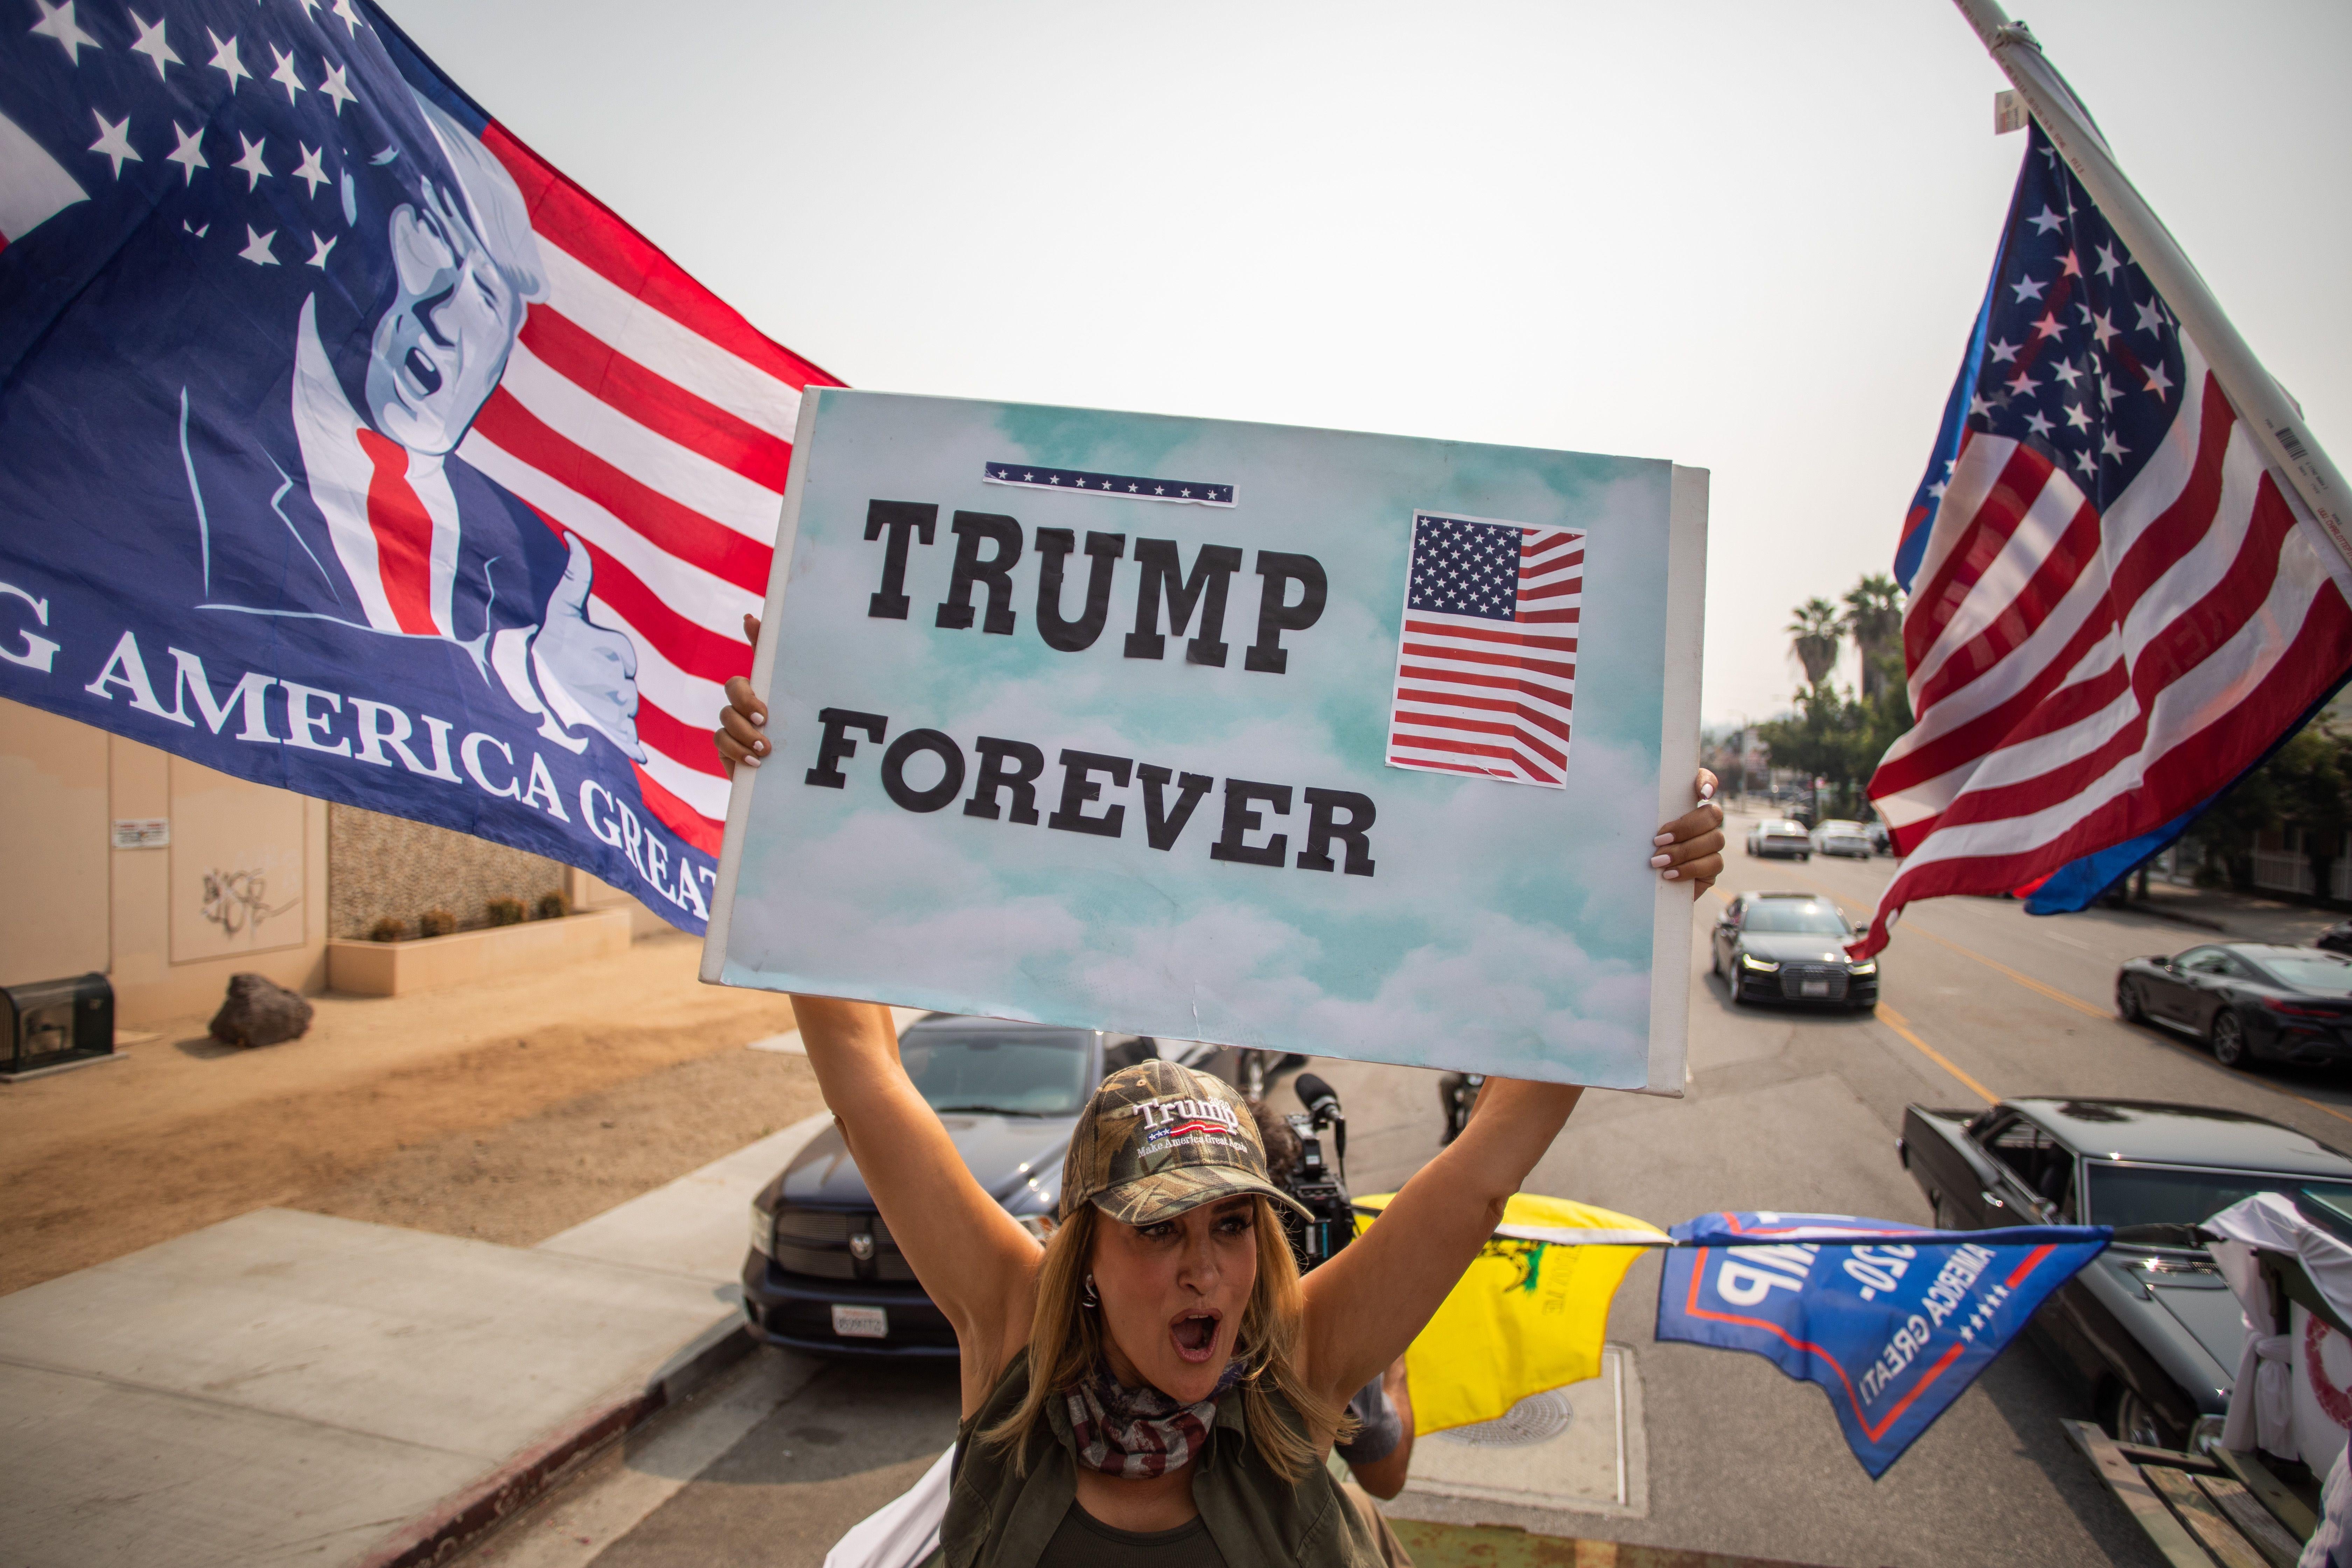 A woman brandishes a "Trump Forever" sign from the back of a military truck.